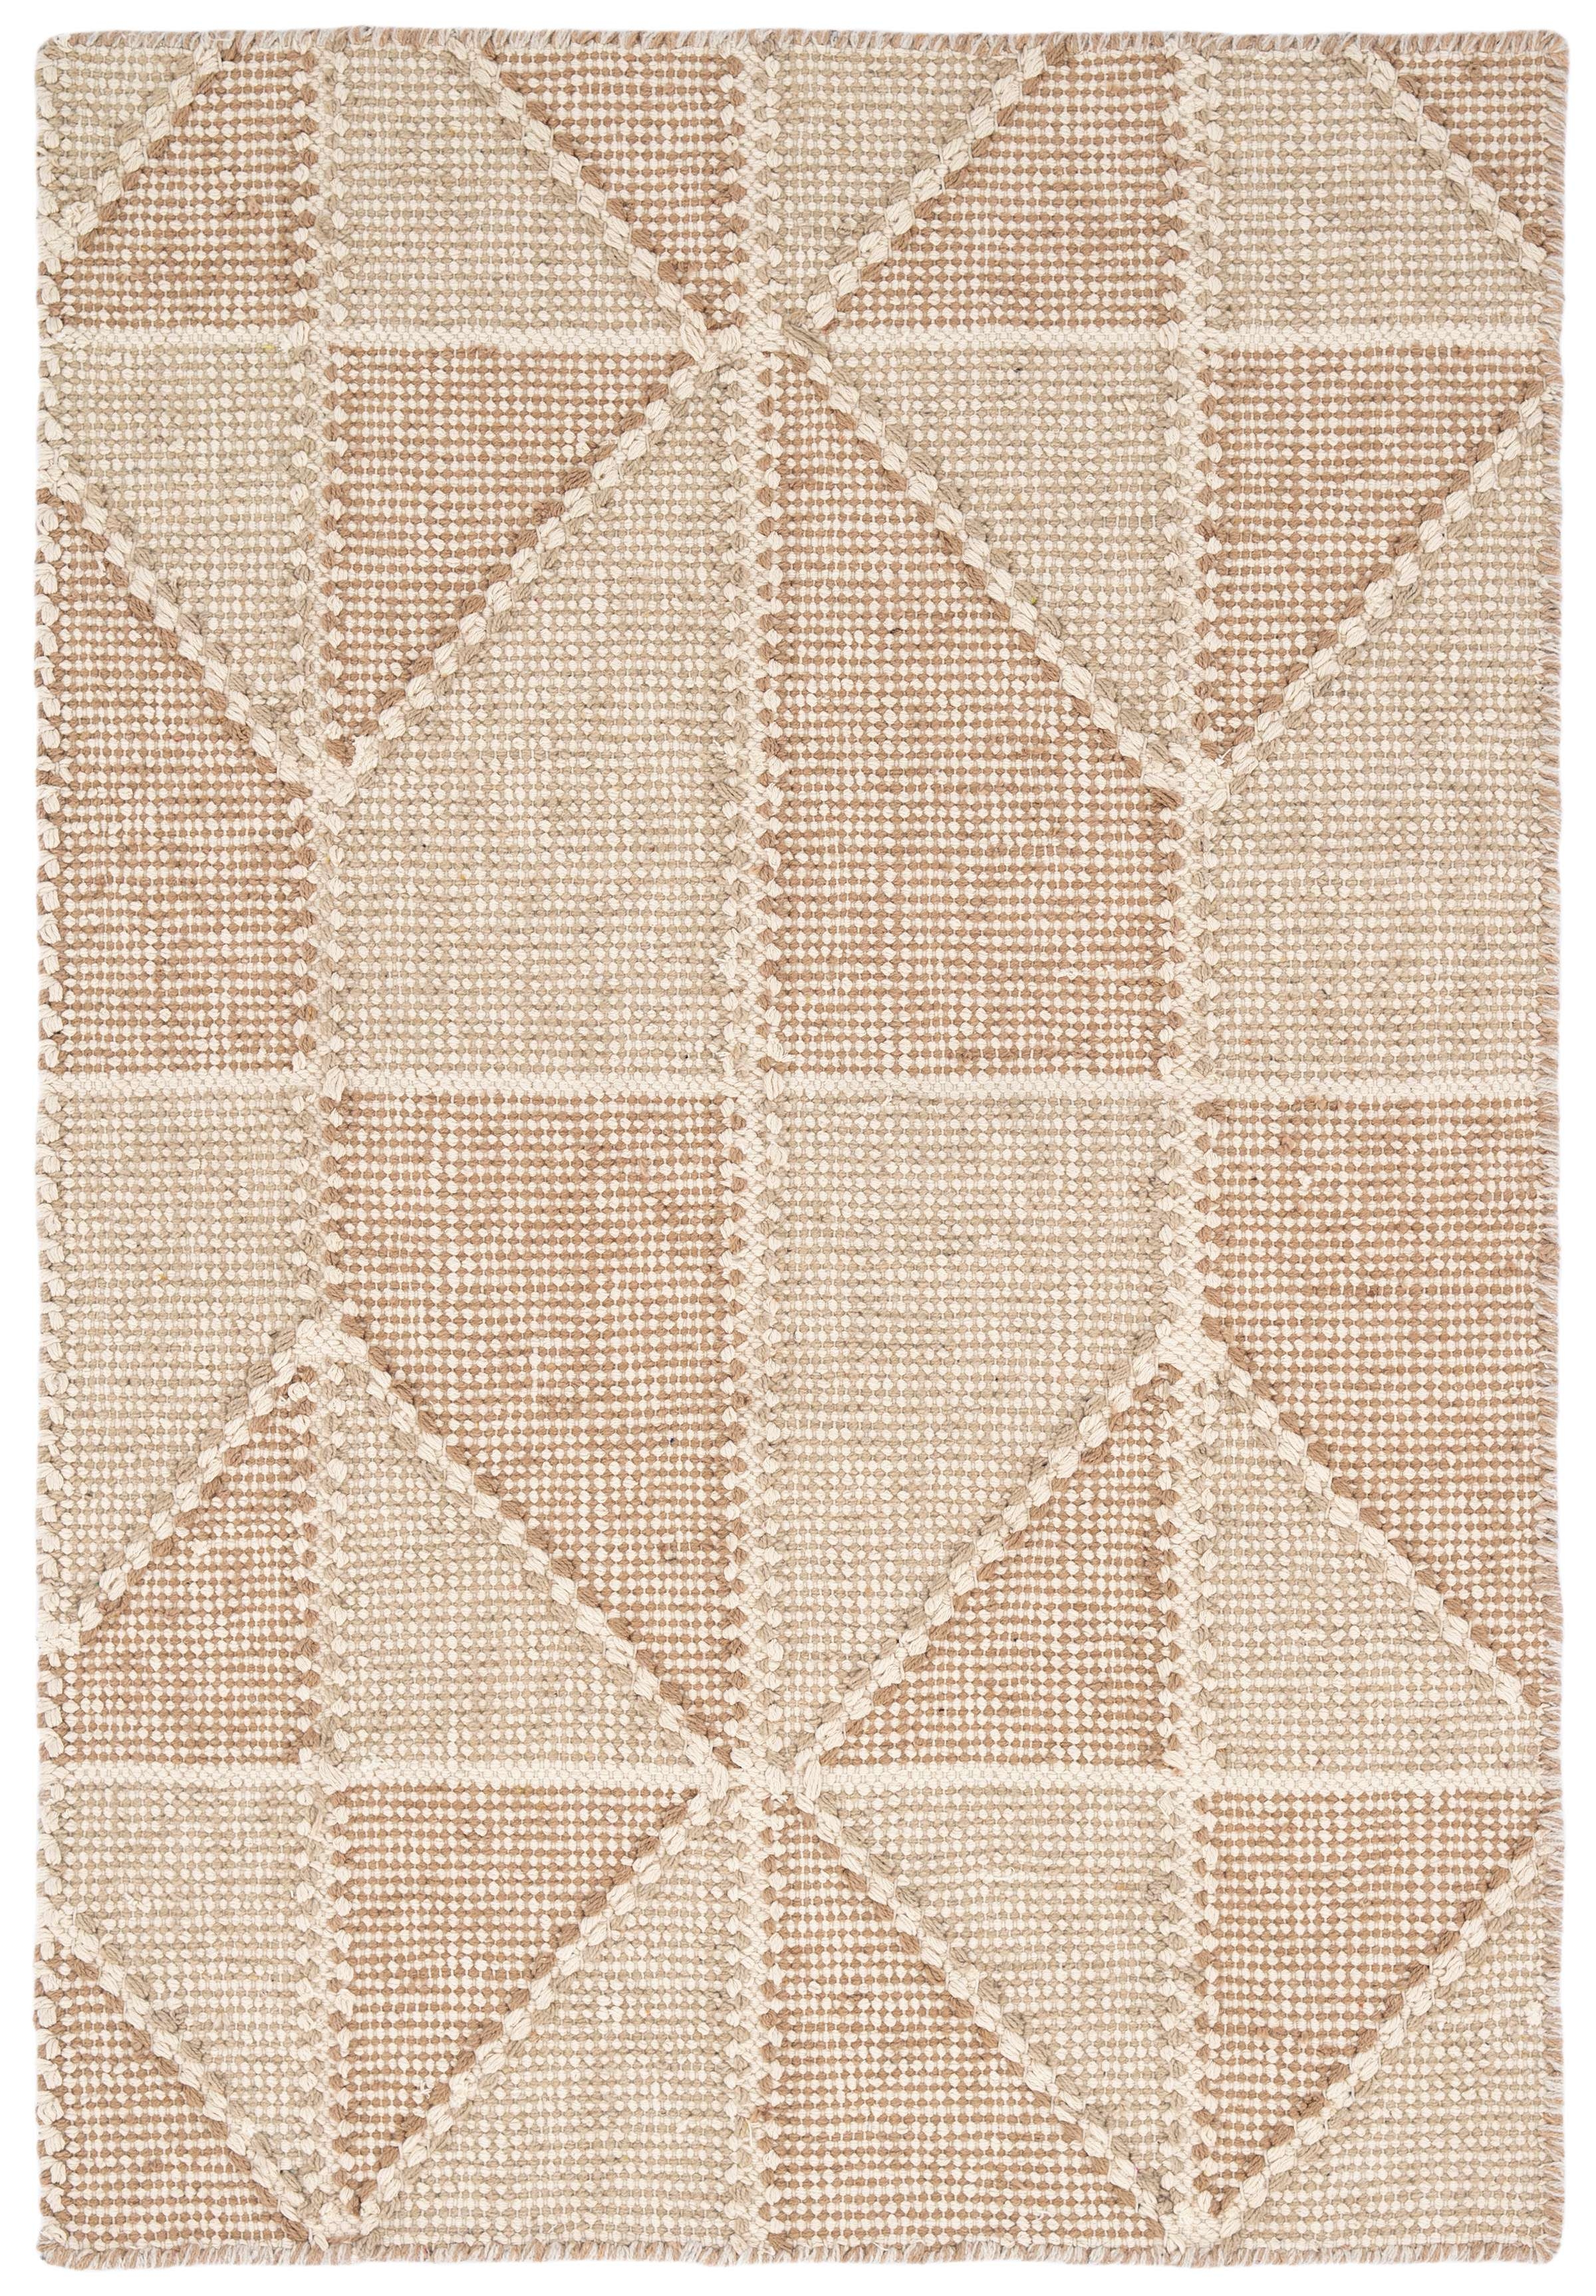 Ojai Wheat Hand Loom Knotted Cotton Rug - Image 0